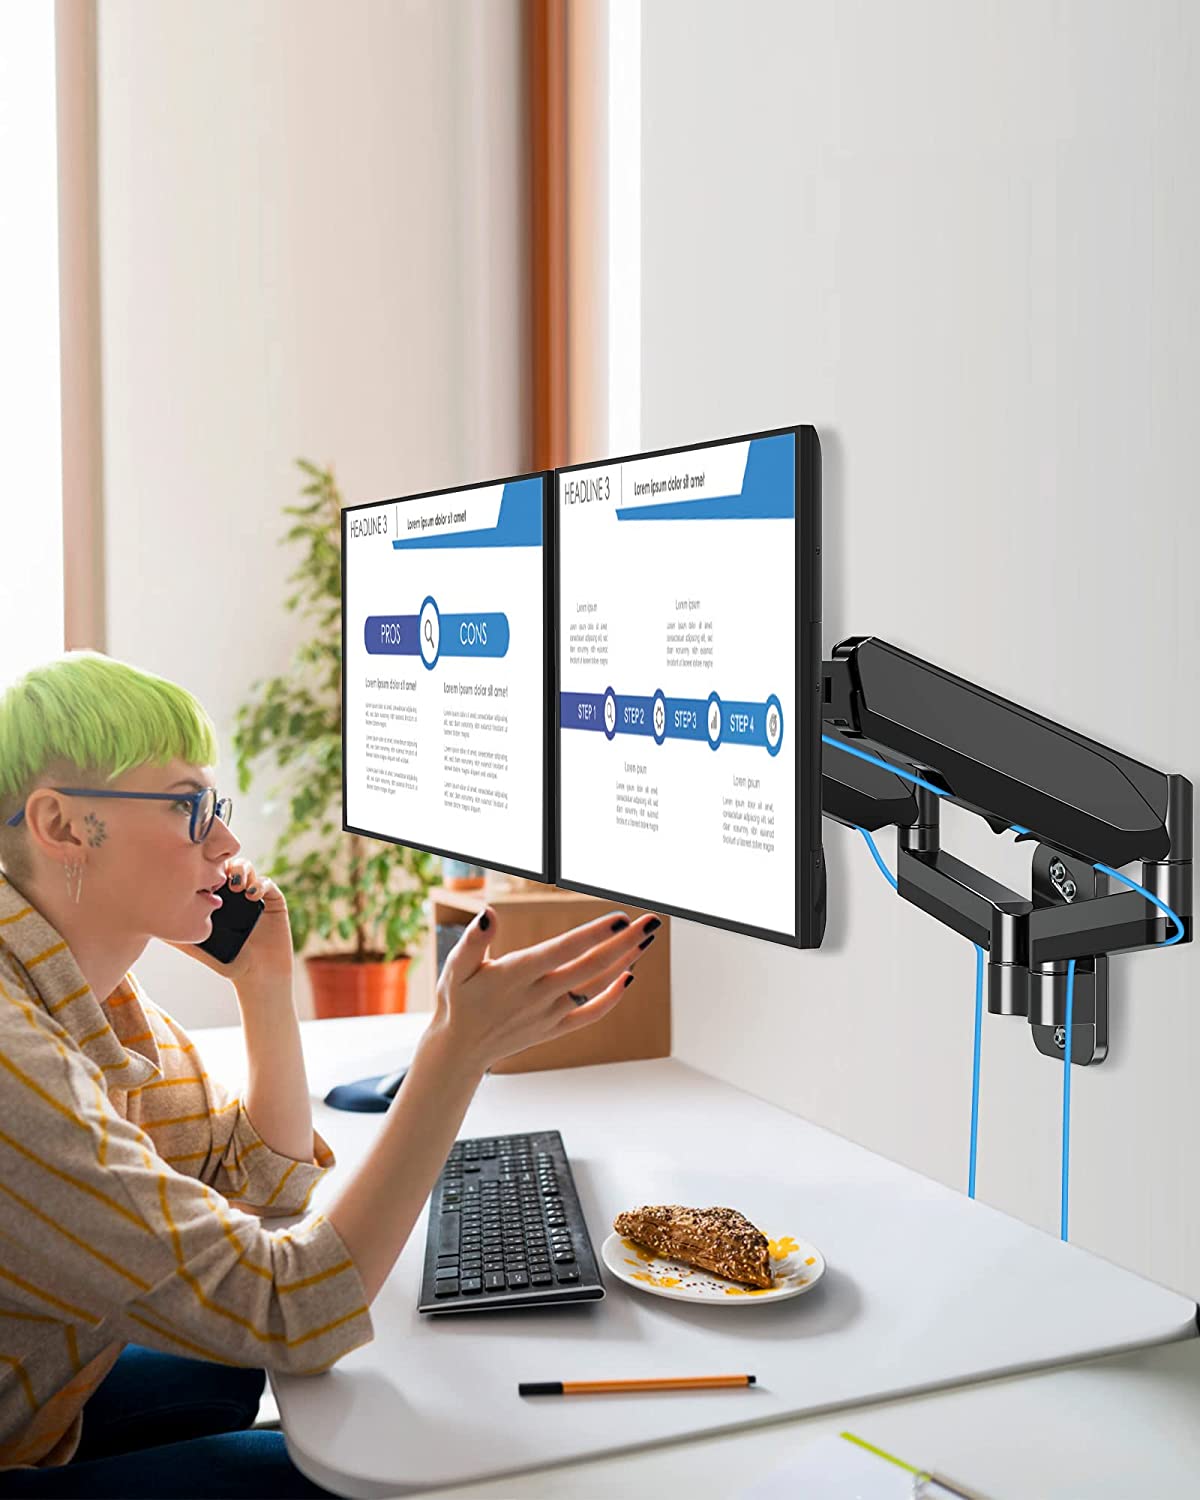 dual monitor wall mount easy viewing angle